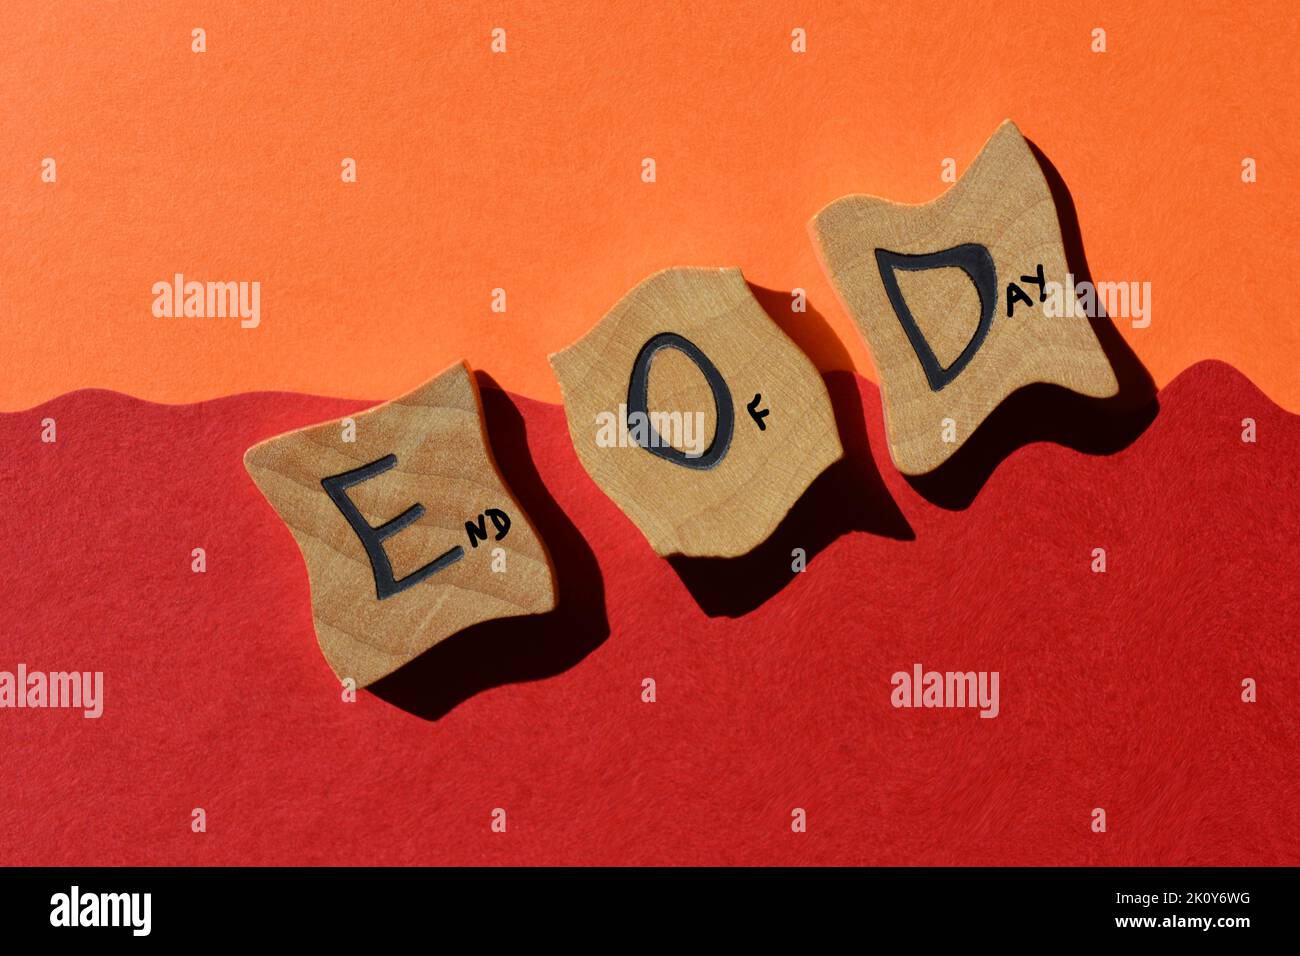 E O D abbreviation for words End of Day, wood alphabet letters isolated on red and orange background Stock Photo